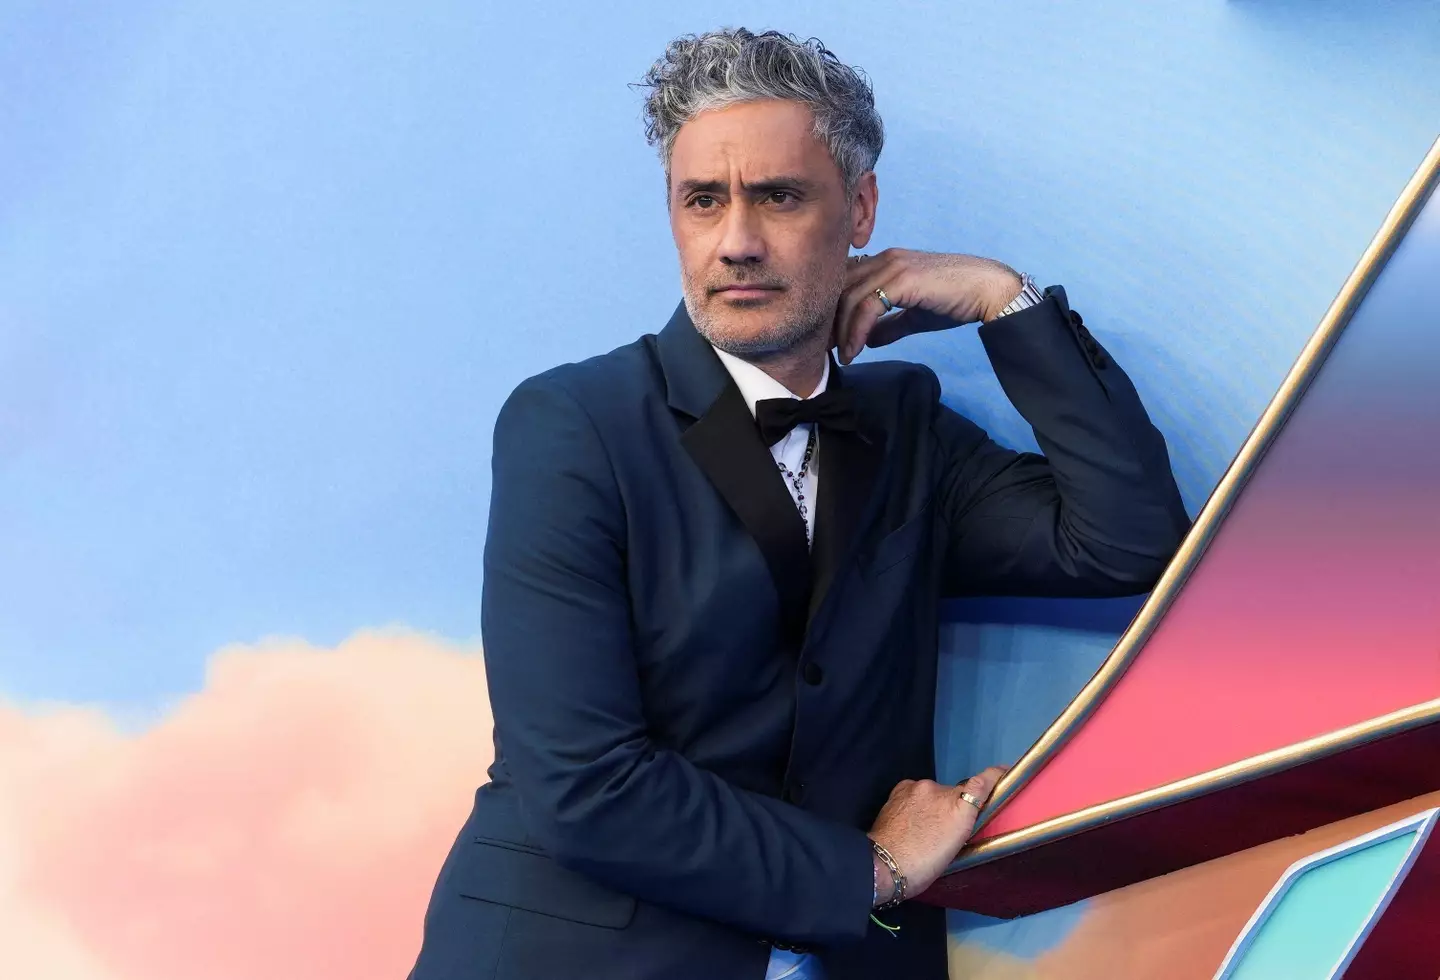 Bush songs were meant to feature in 'Thor: Love and Thunder' according to Waititi.